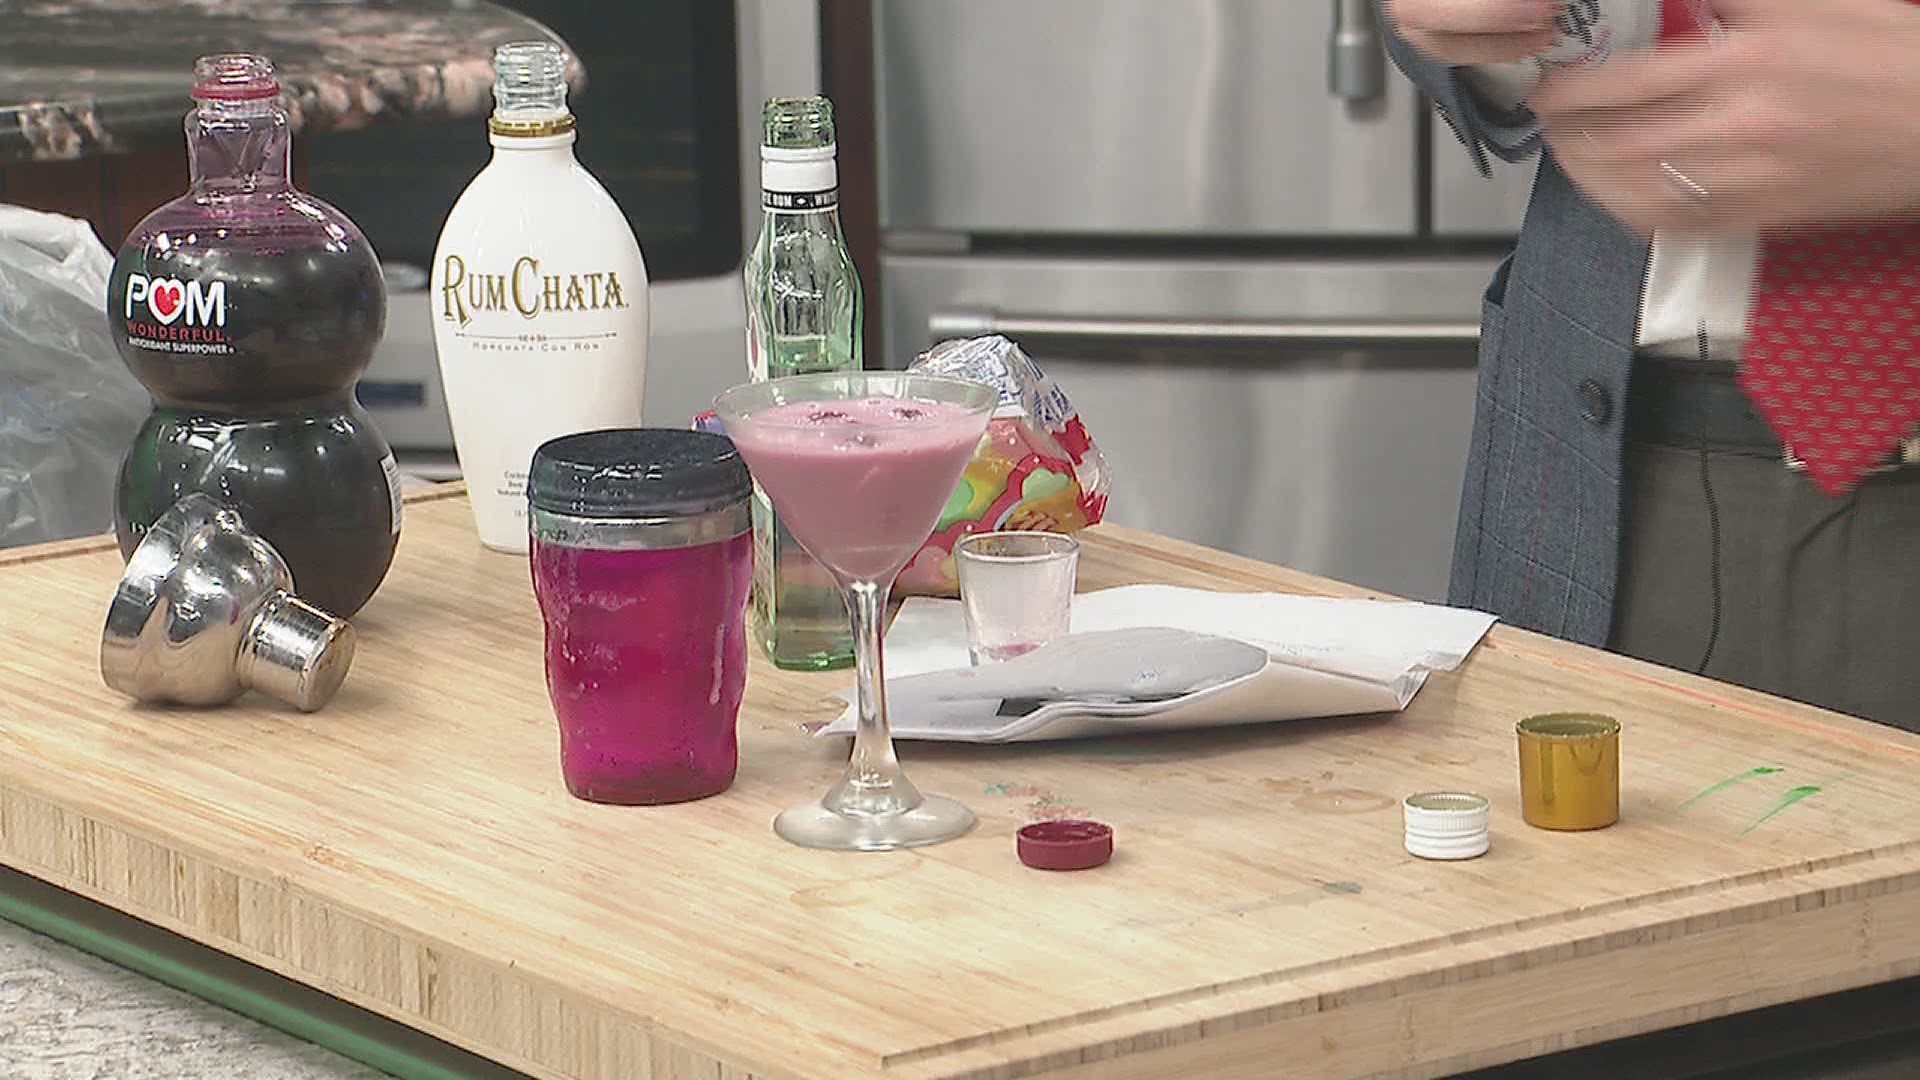 The drink was made Friday, April 9th during Good Morning Quad Cities at 11.